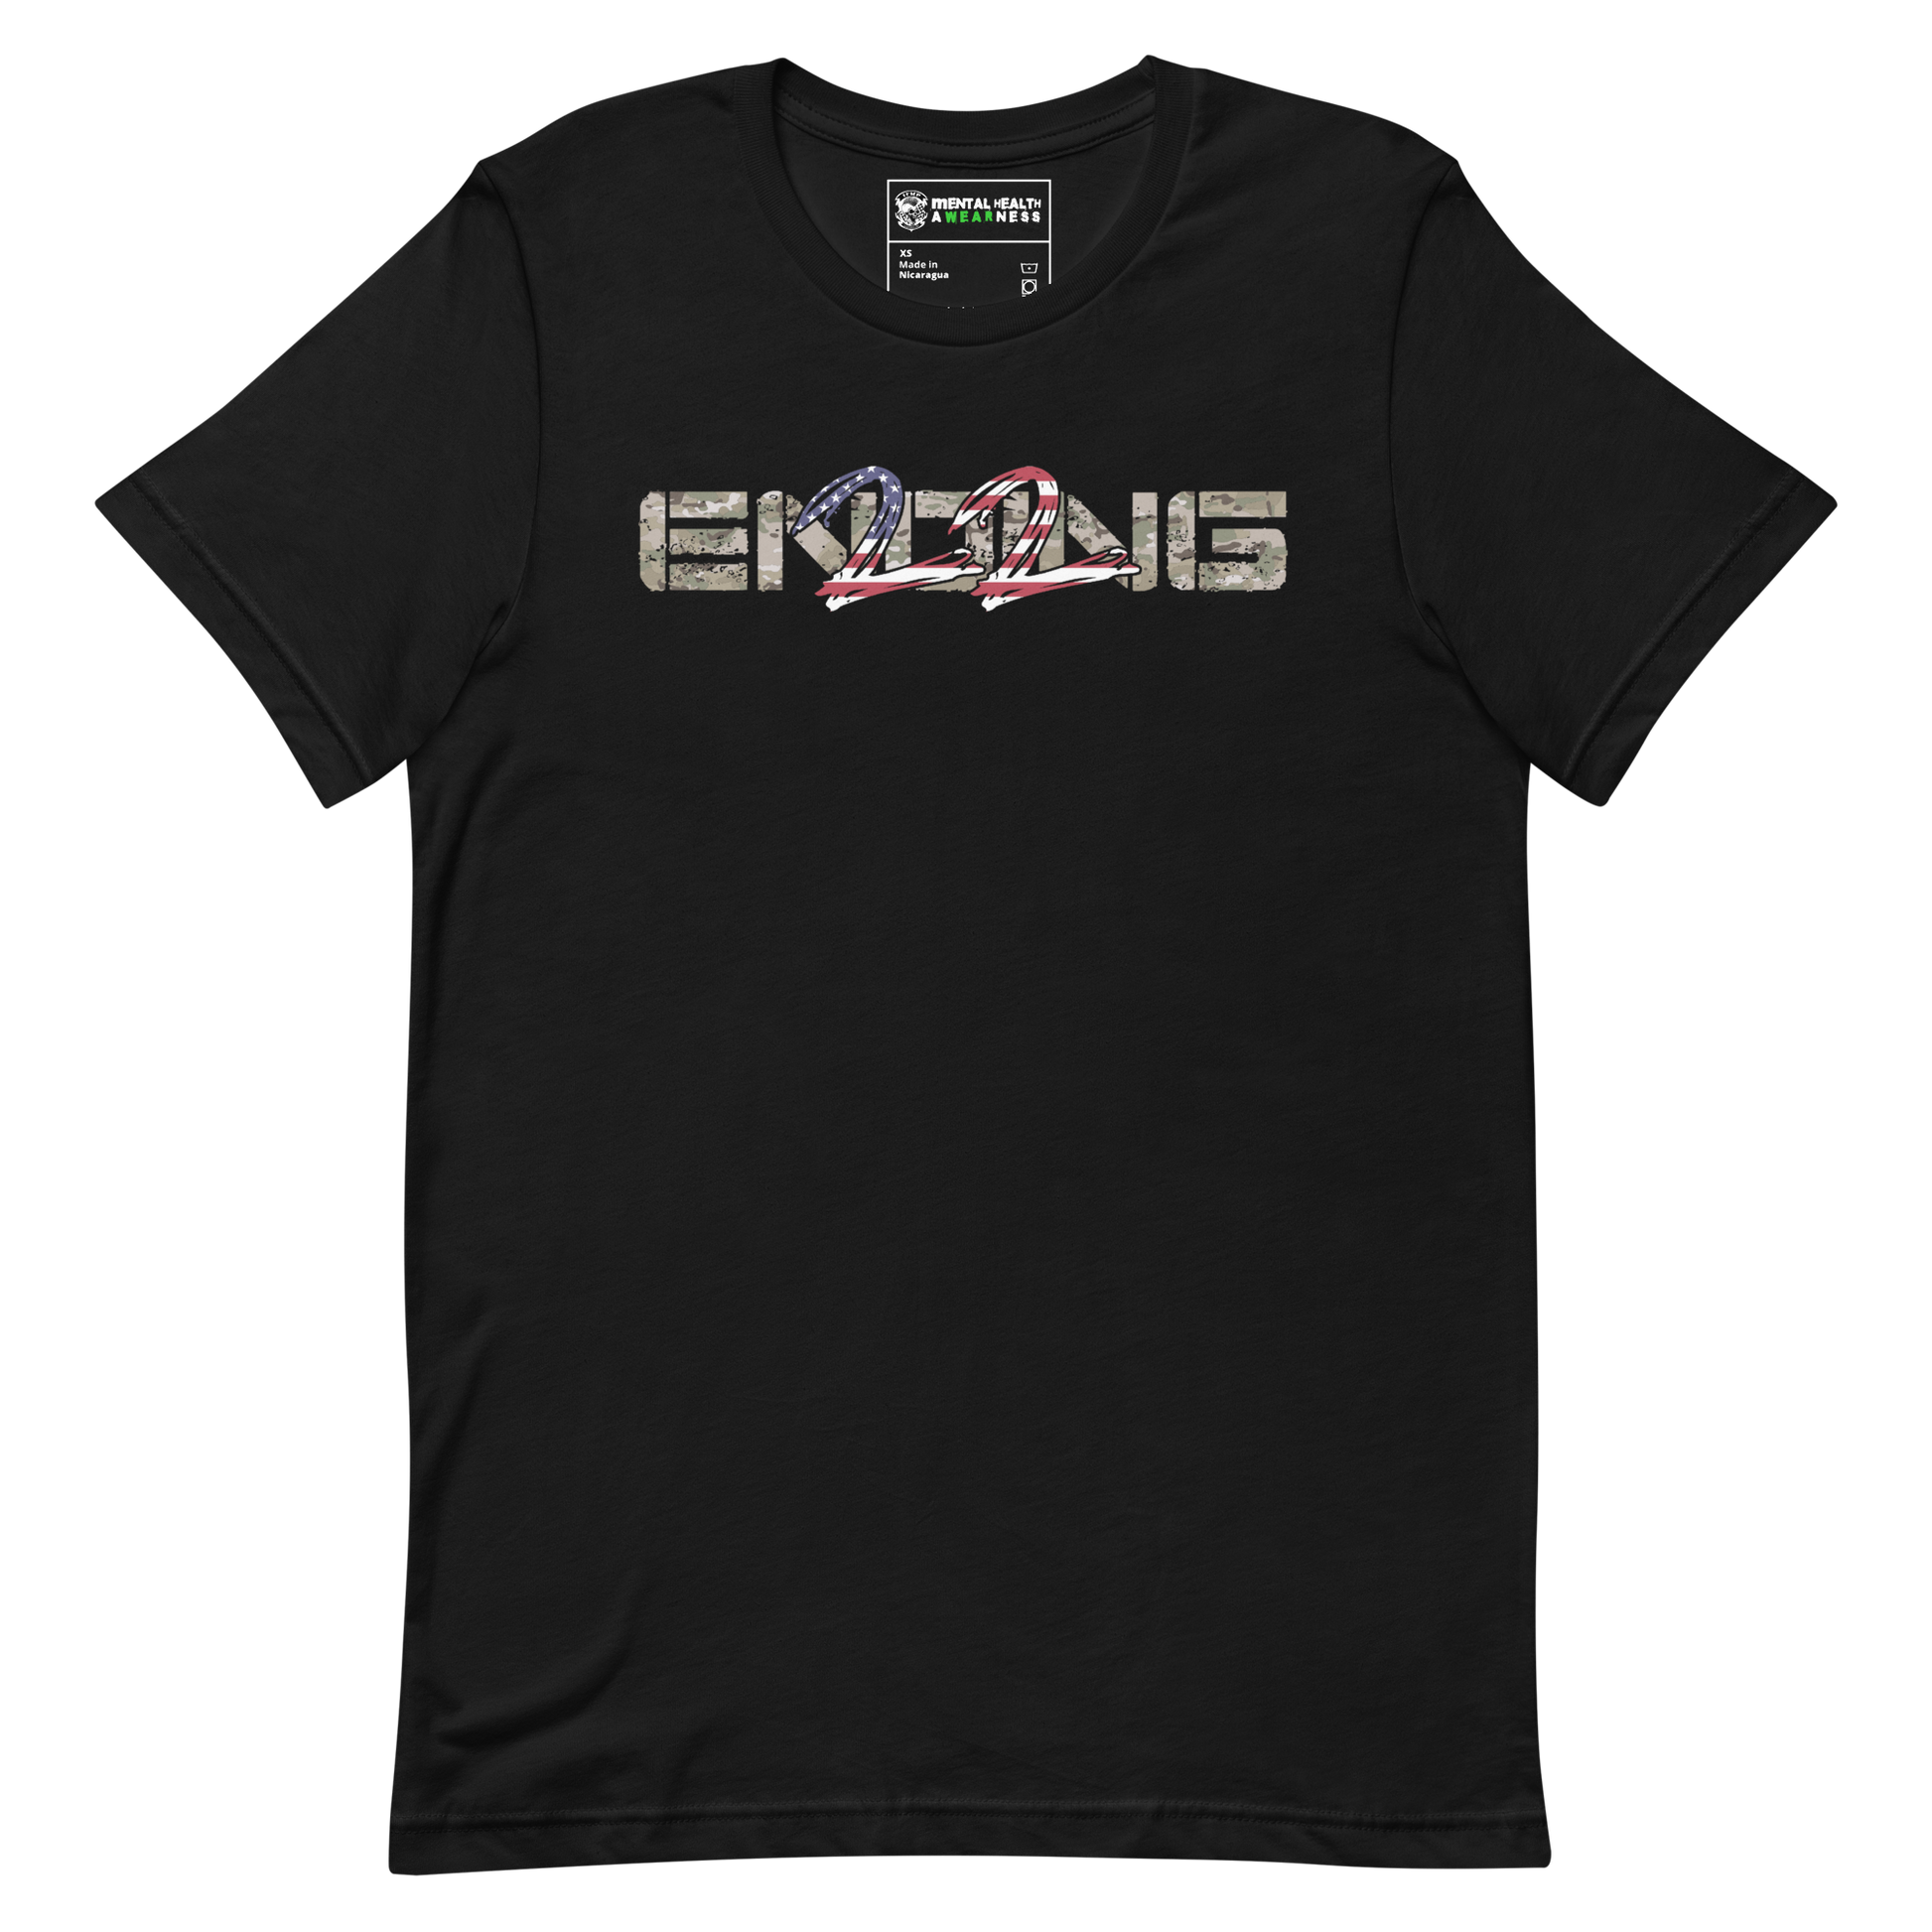 ENDING 22 Army "Grunt" Edition Black T-Shirt Front